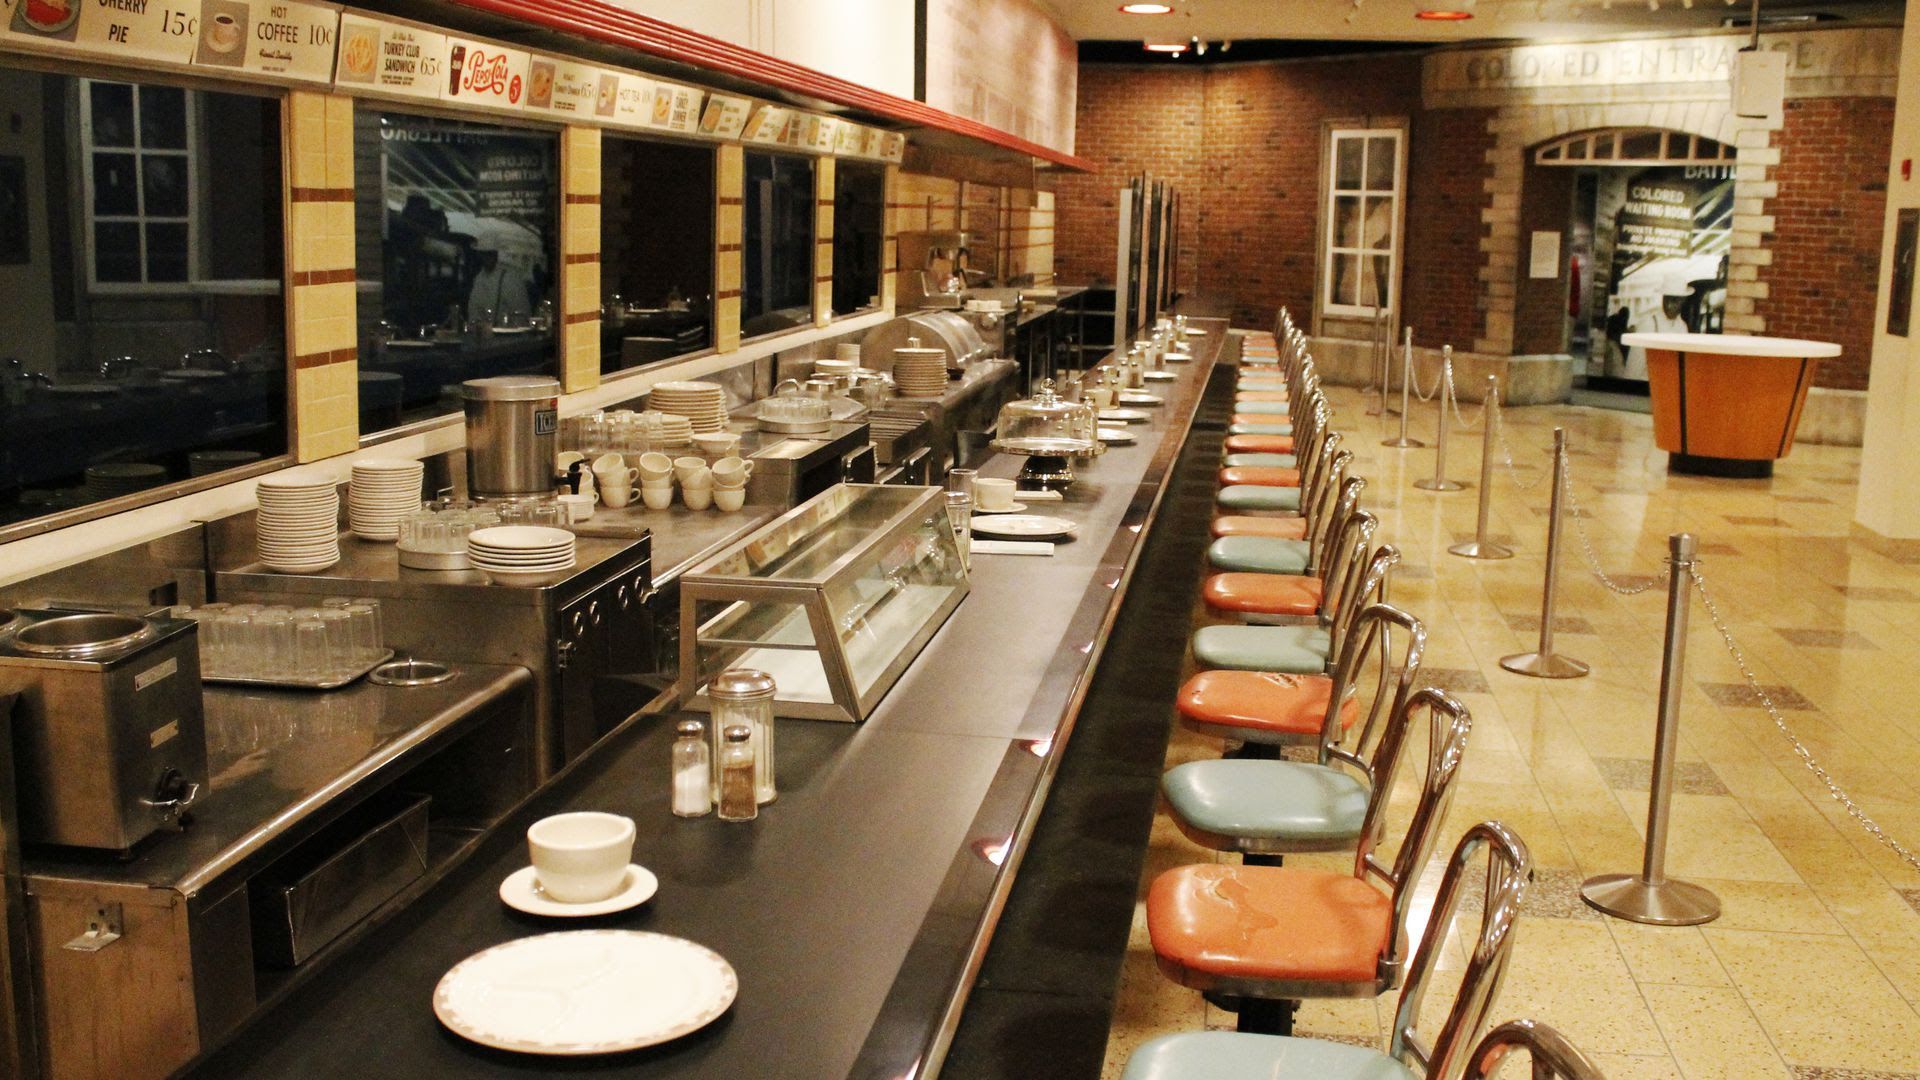 The F.W. Woolworth's lunch counter, as seen at the International Civil Rights Center & Museum in Greensboro, N.C., part of the new U.S. Civil Rights Trail.